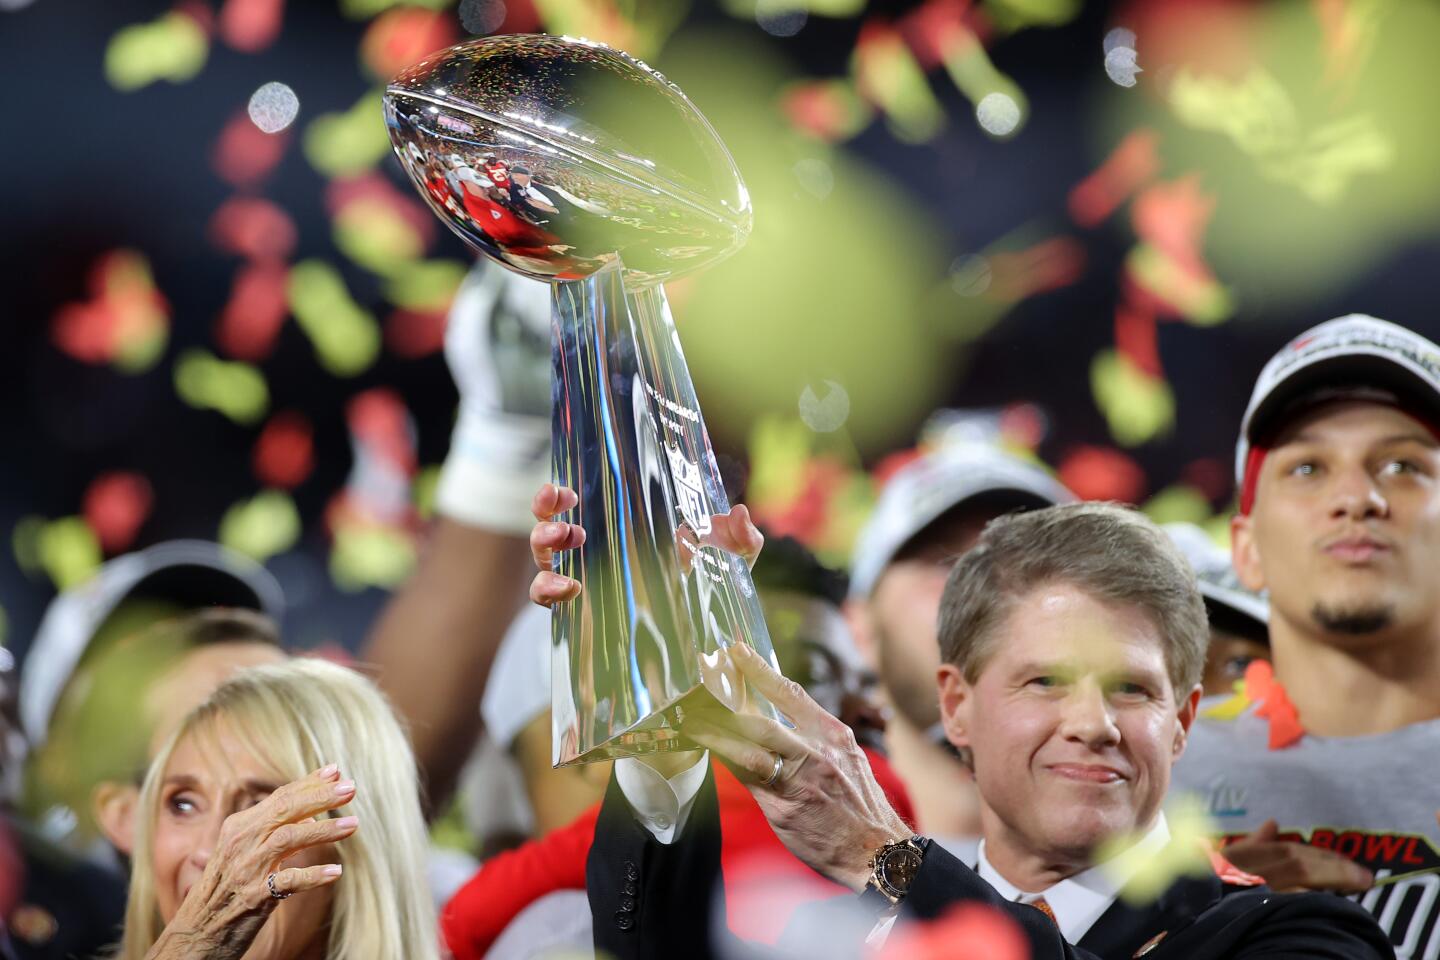 Kansas City Chiefs owner and CEO Clark Hunt raises the Vince Lombardi Trophy after the team's 31-20 victory over the San Francisco 49ers in Super Bowl LIV.